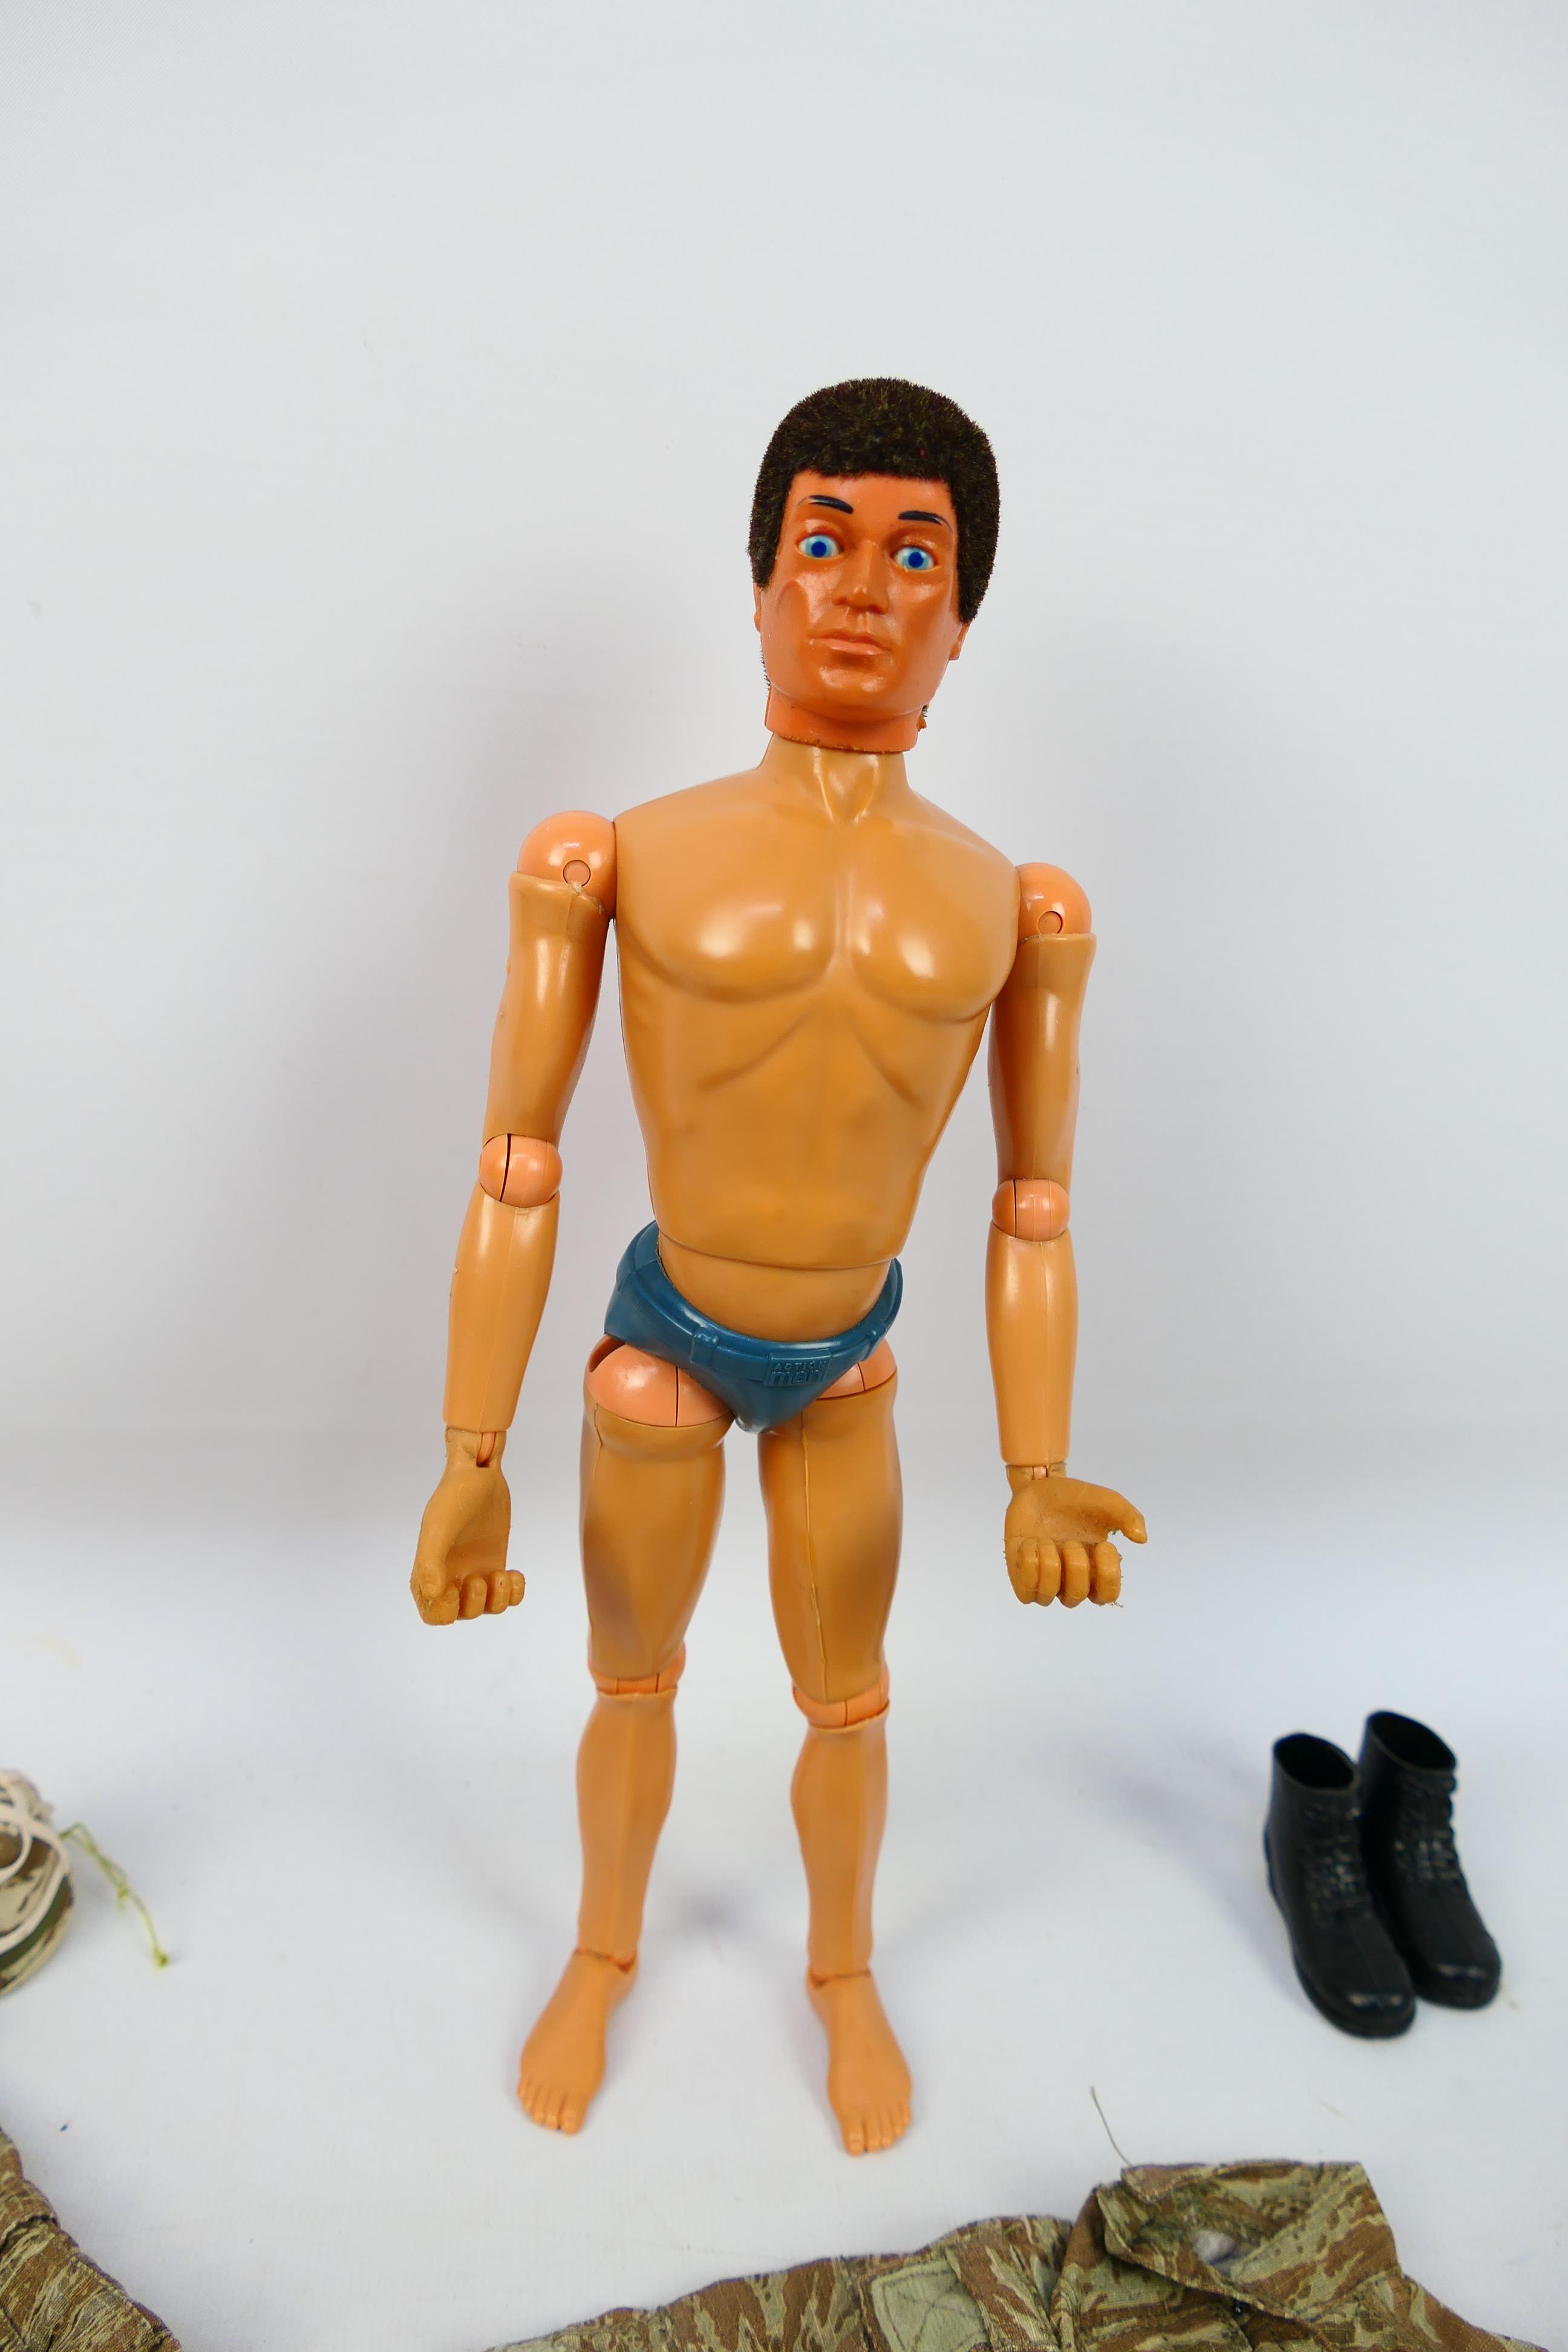 Palitoy - Action Man - An unboxed 1978 Action Man action figure with Flock hair, - Image 3 of 12